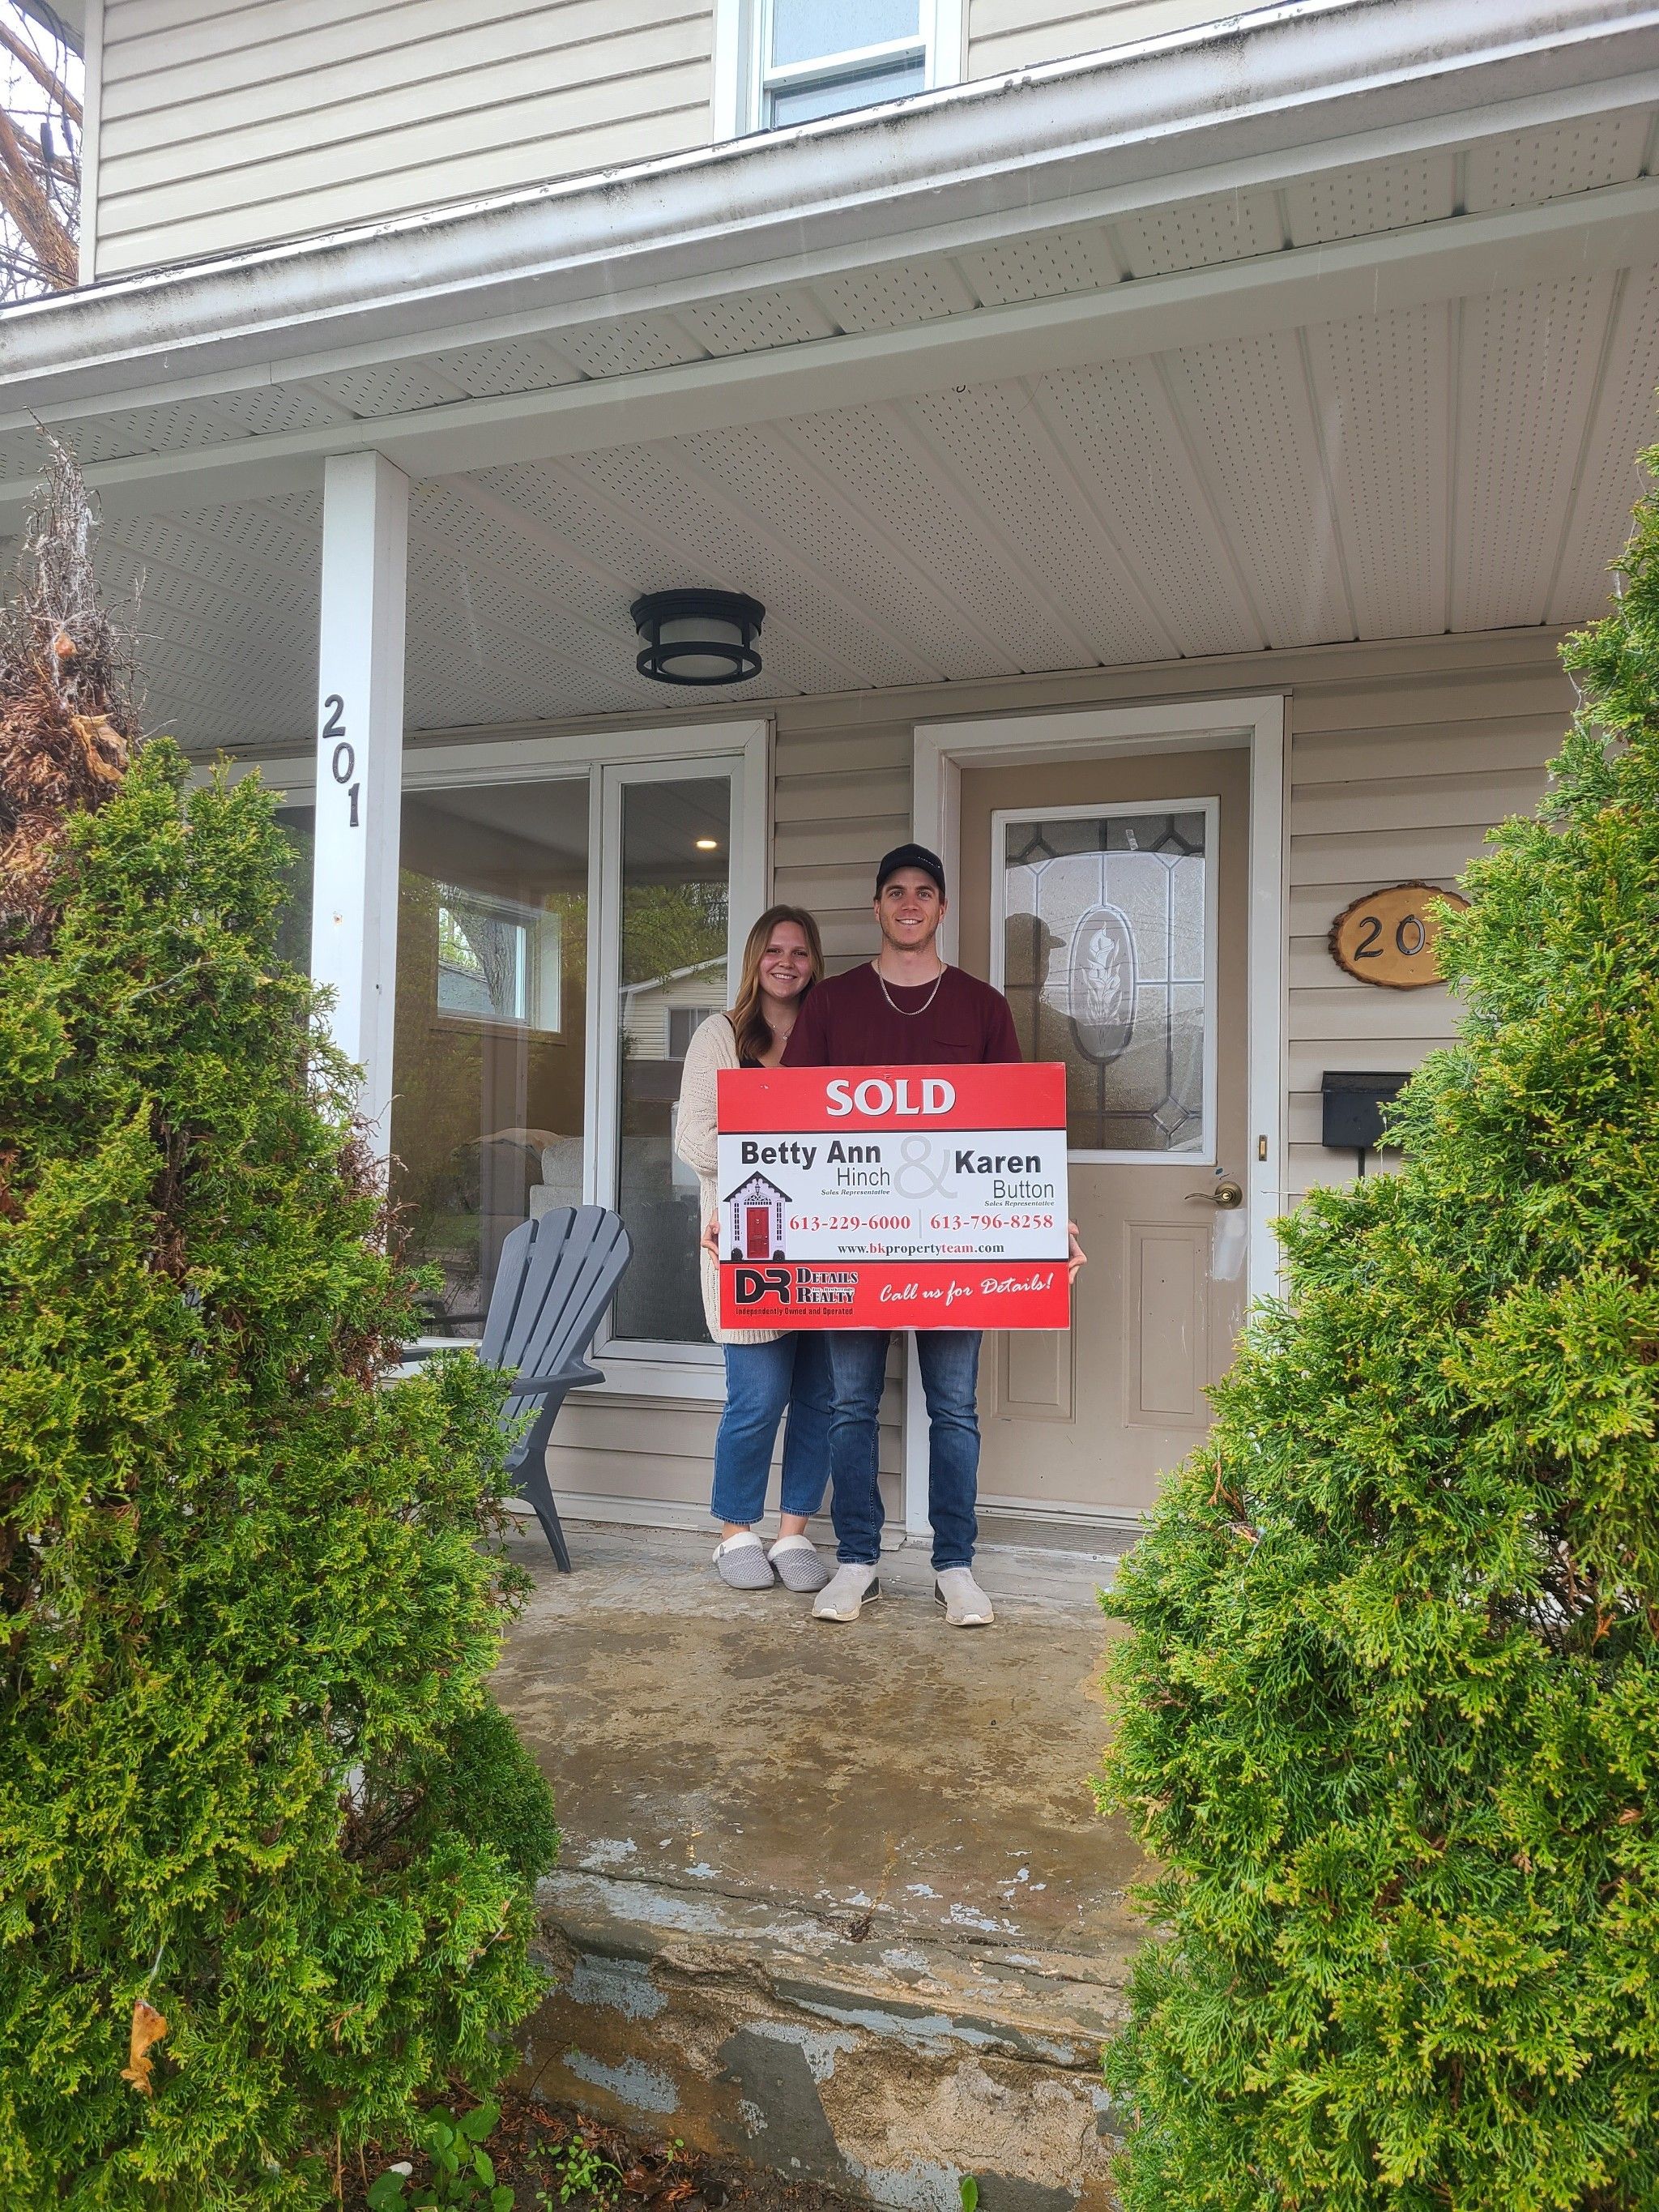 Congratulations to our First Time Buyer Clients!